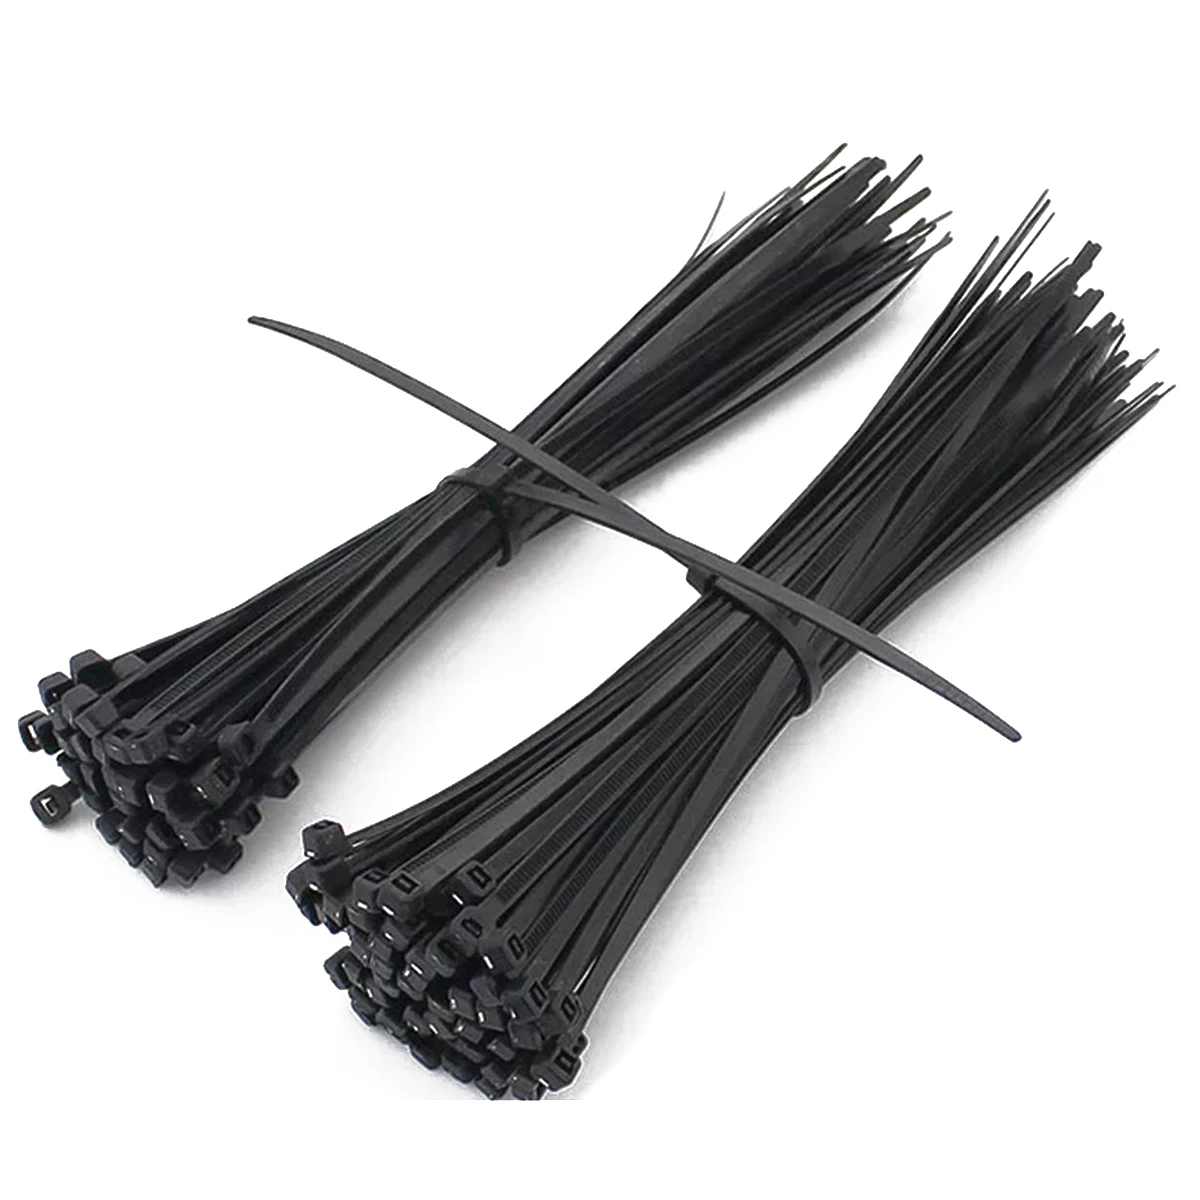 8 inch BLACK Wire & Cable Zip Ties Nylon Tie Wraps 300 USA MADE TOUGH TIES 4 6 